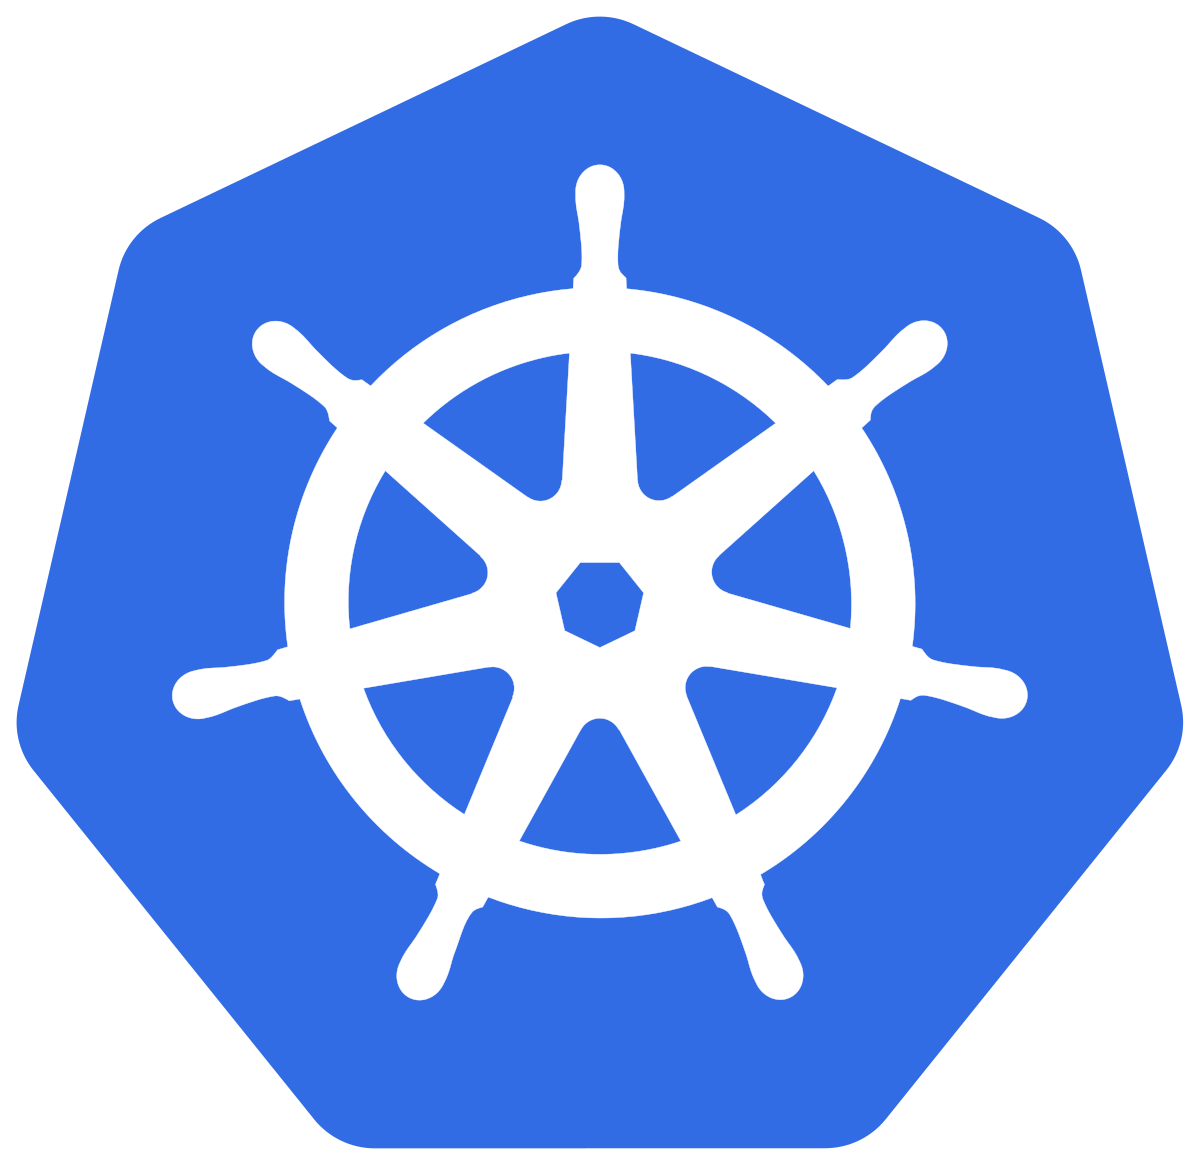 How to set up a CrateDB cluster with Kubernetes